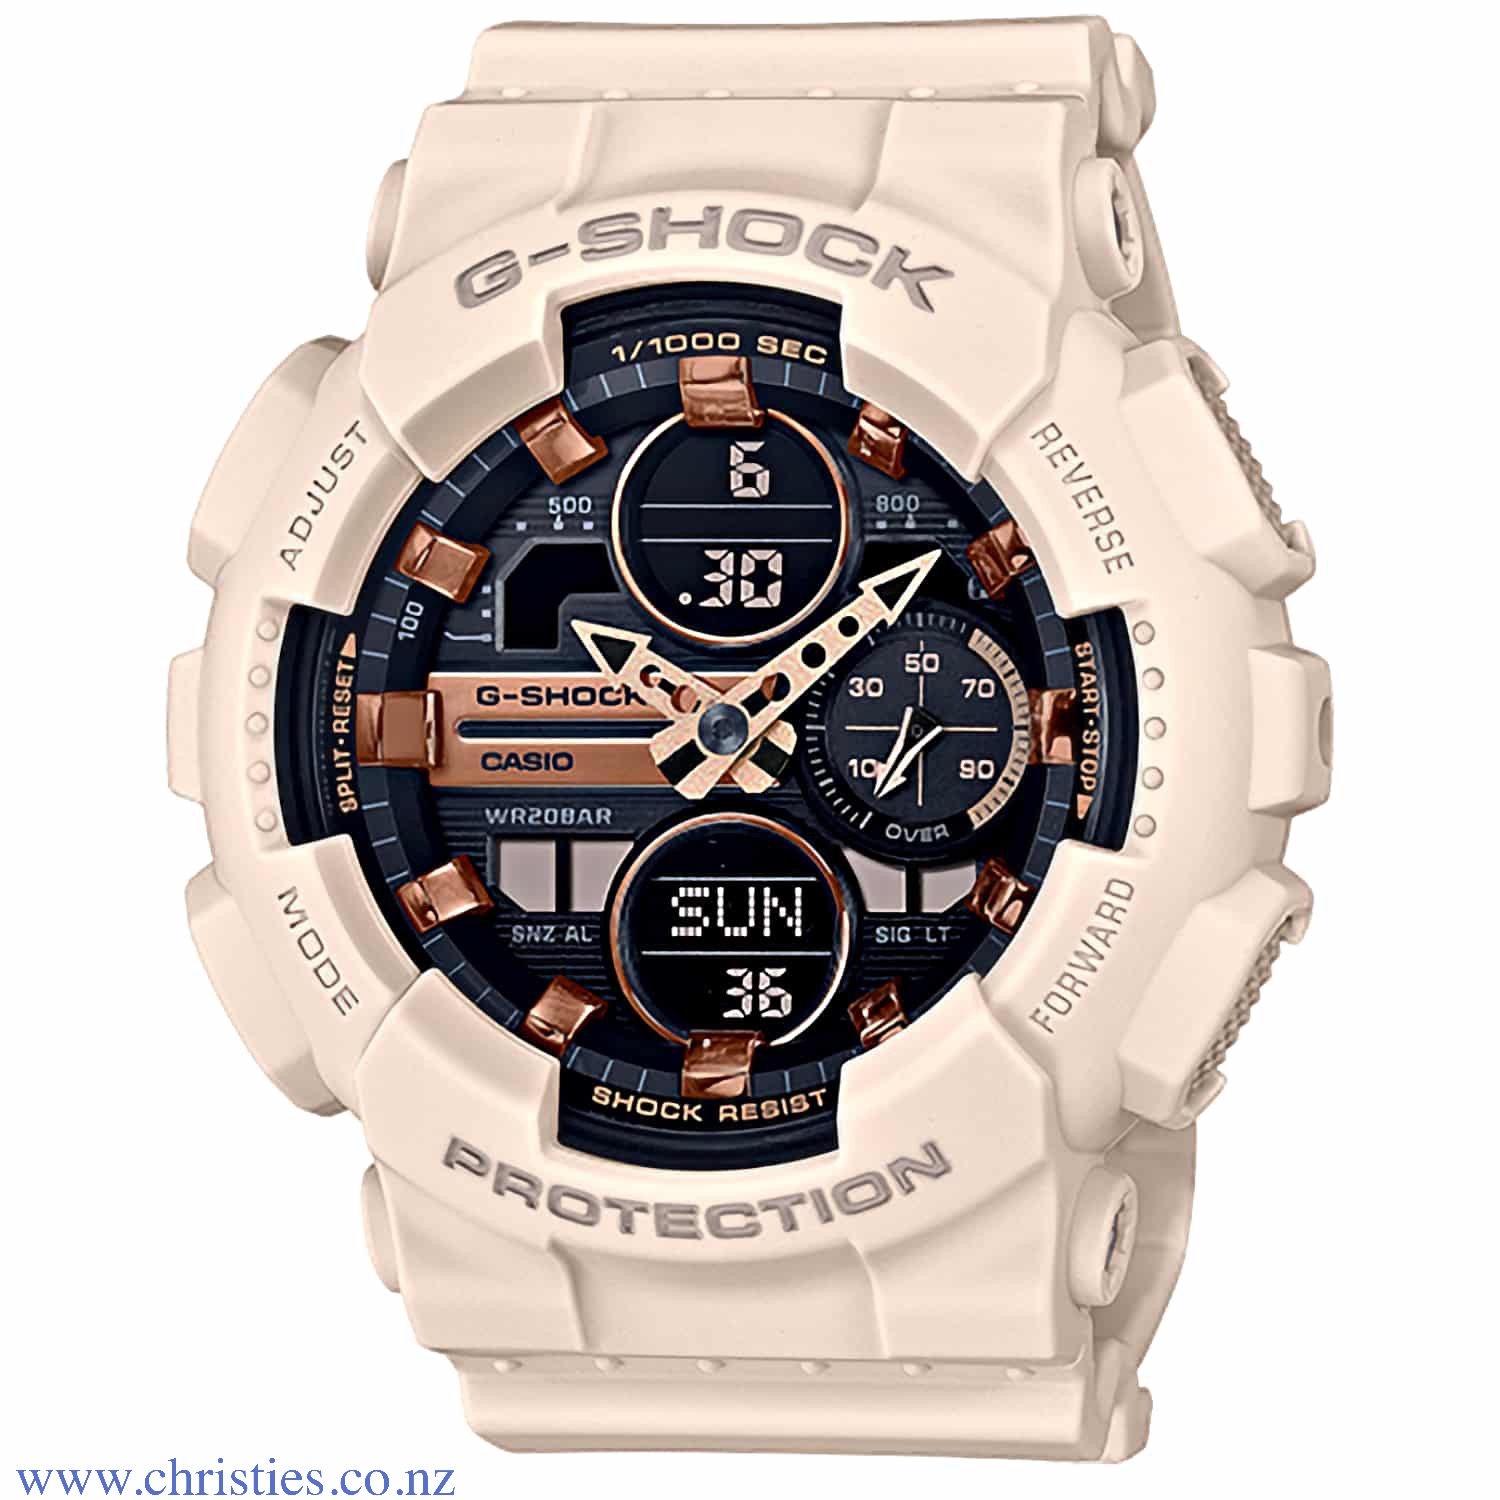 GMAS140M-4A Casio G-SHOCK  Womens Series Watch. Introducing new compact G-SHOCK models that are great choices for women who prefer G-SHOCK styling. These new models represent a down-sizing of the popular GA140. 2 Year Casio Guarantee which is only availab